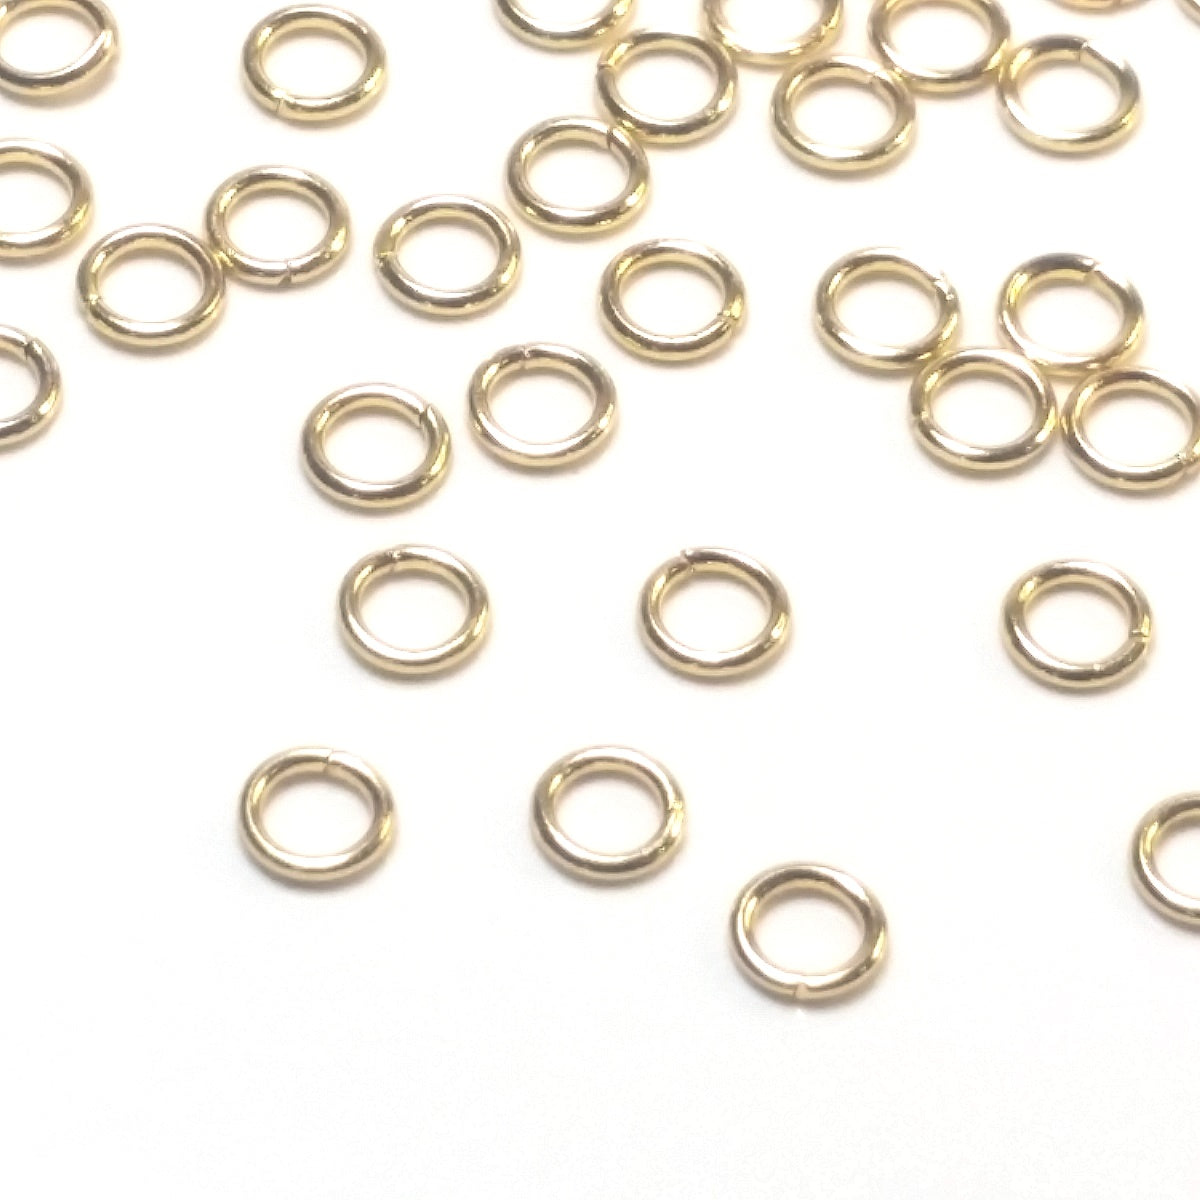 7mm Gold Plated Jump Rings 19 Gauge Iron Based Alloy - 100pcs 7mm x 1mm